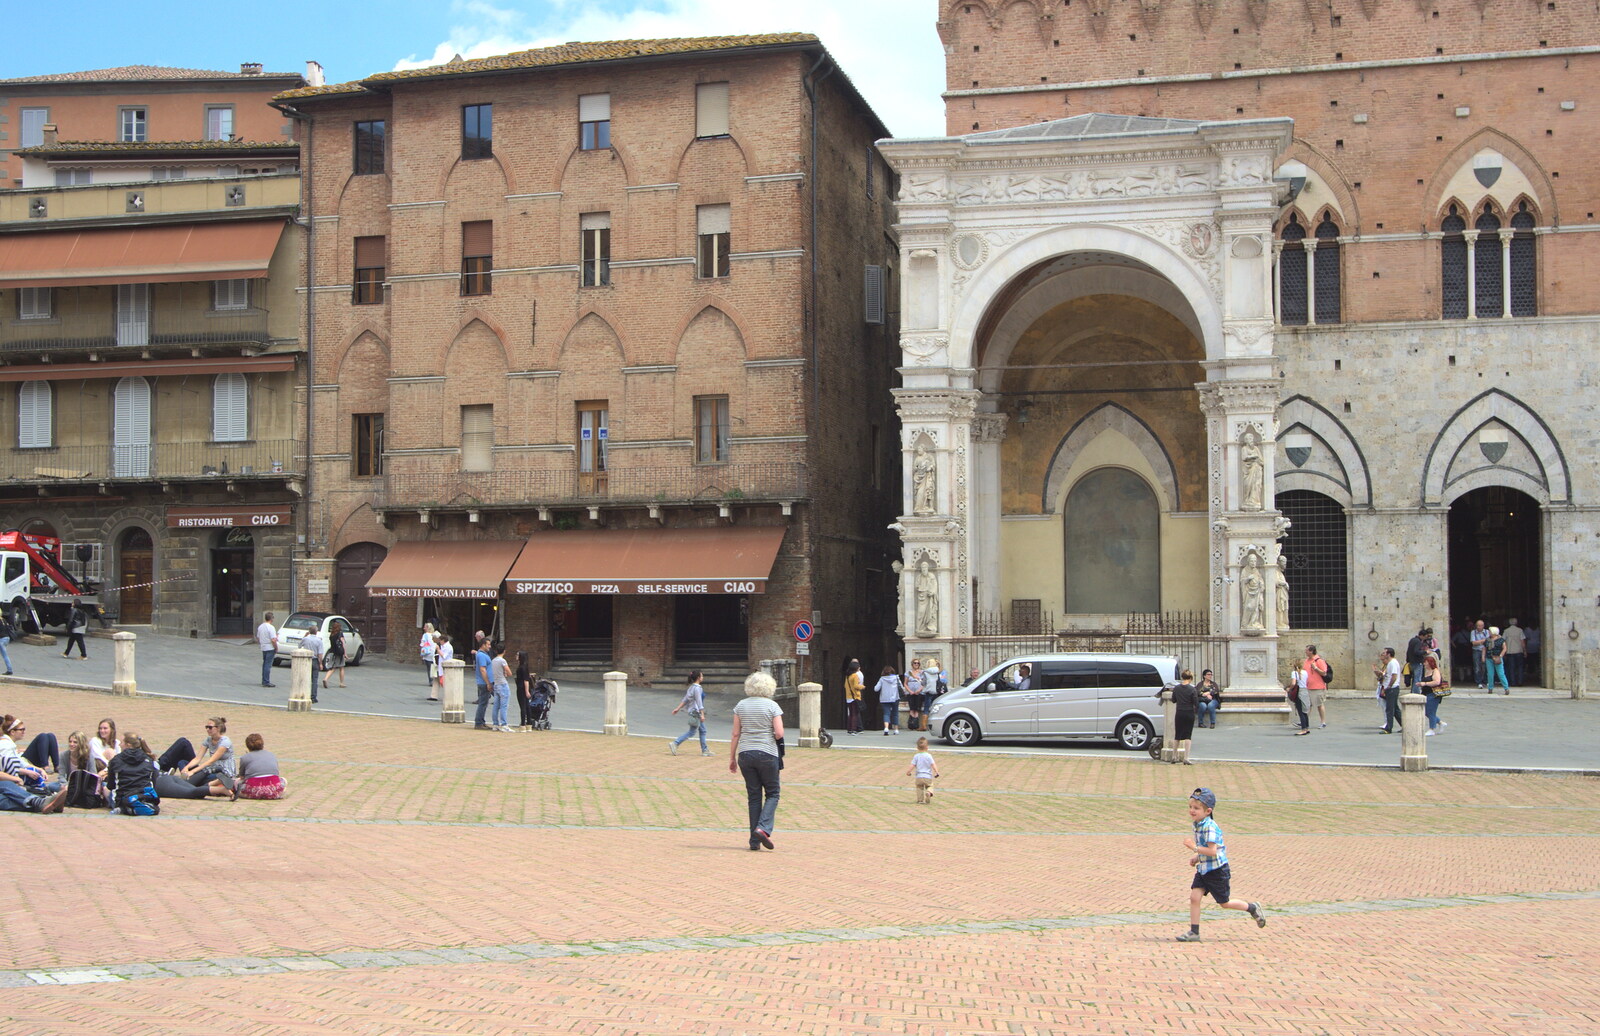 A Tuscan Winery and a Trip to Siena, Tuscany, Italy - 10th June 2013: Fred runs around the piazza